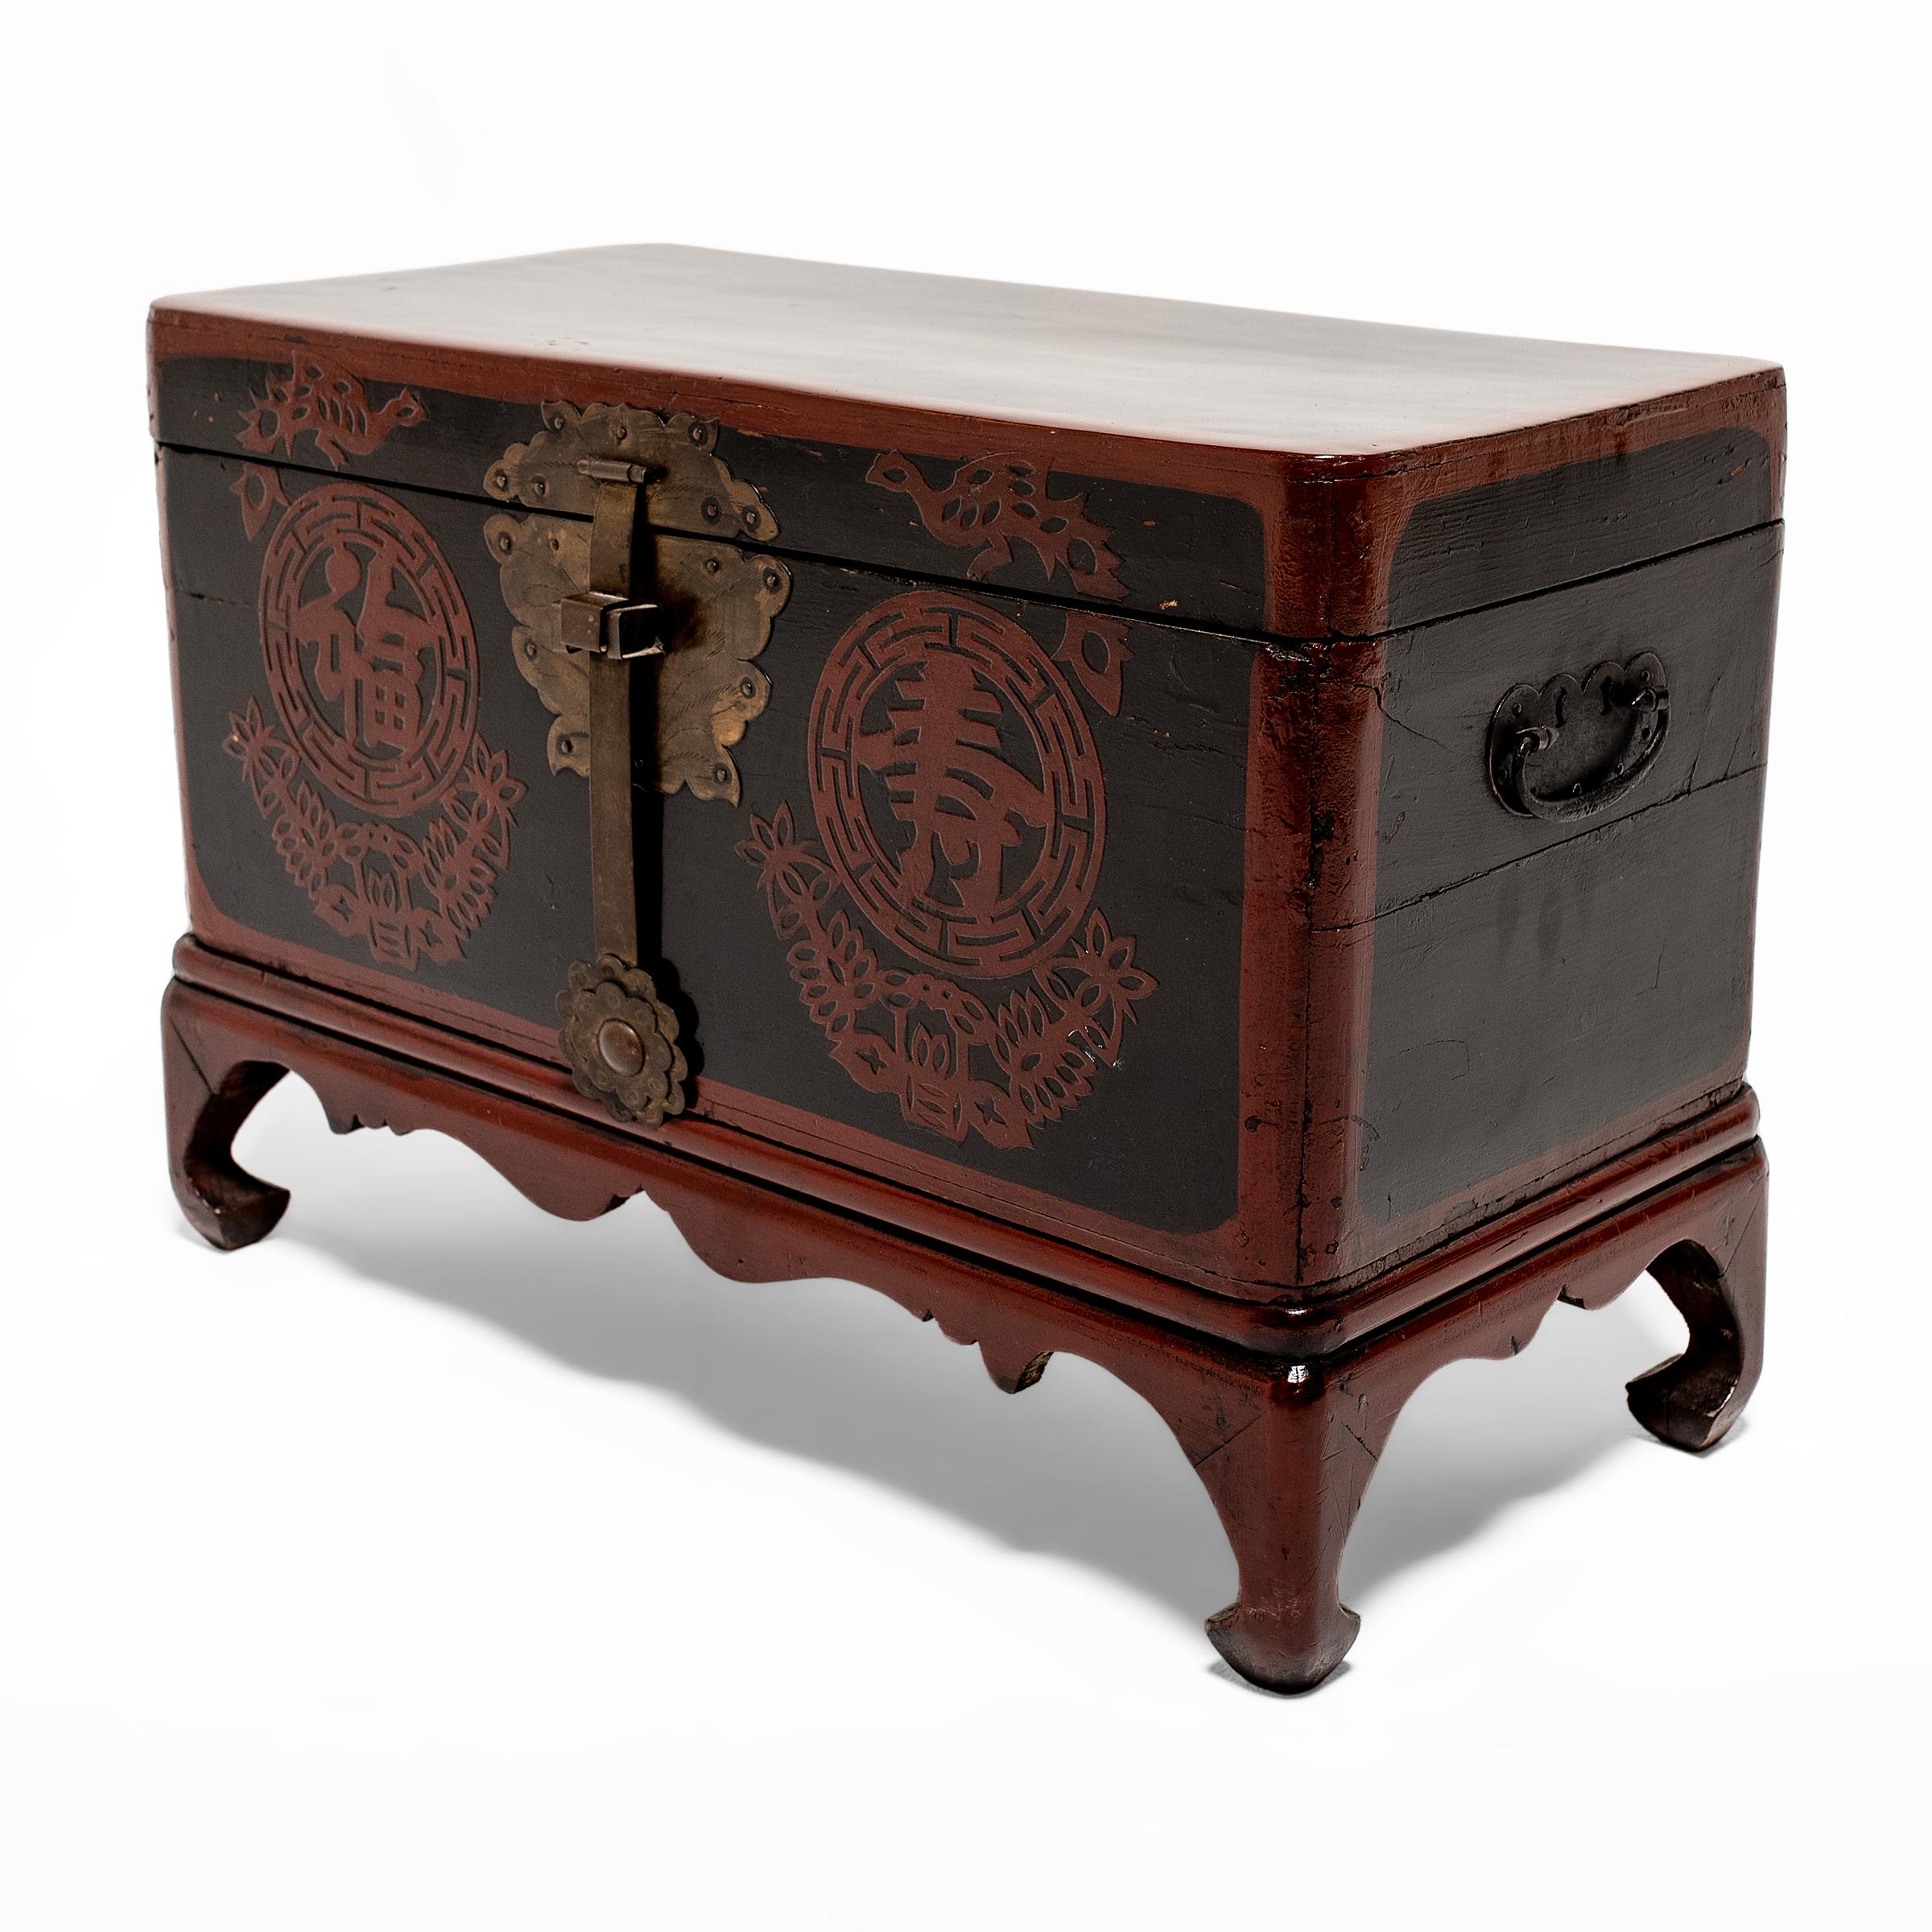 This lacquered wedding chest dates to the early 20th century and was likely originally used as a bridewealth chest during a traditional Korean wedding ceremony. The exterior is finished with red and black lacquer and decorated with two round